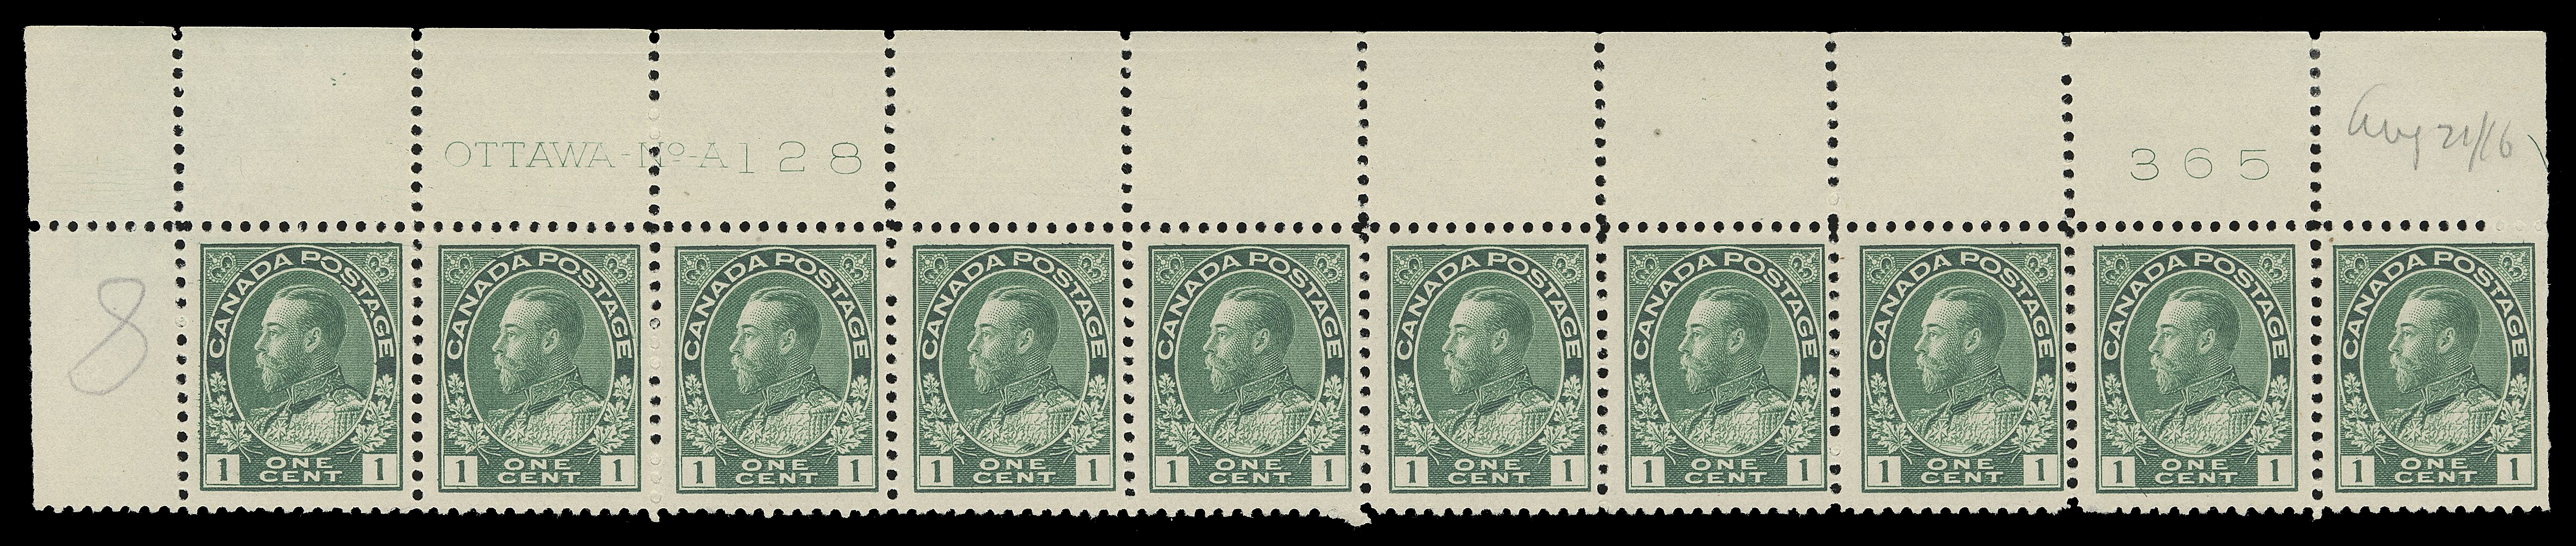 ADMIRAL STAMPS  104e,Four fresh mint strips of ten with consecutive plate numbers - UL Plate 127, UL Plate 128, UR Plate 129, UL Plate 130; reasonably to well centered. All hinged in selvedge only leaving all stamps NH, F-VF (Unitrade cat. $3,800)